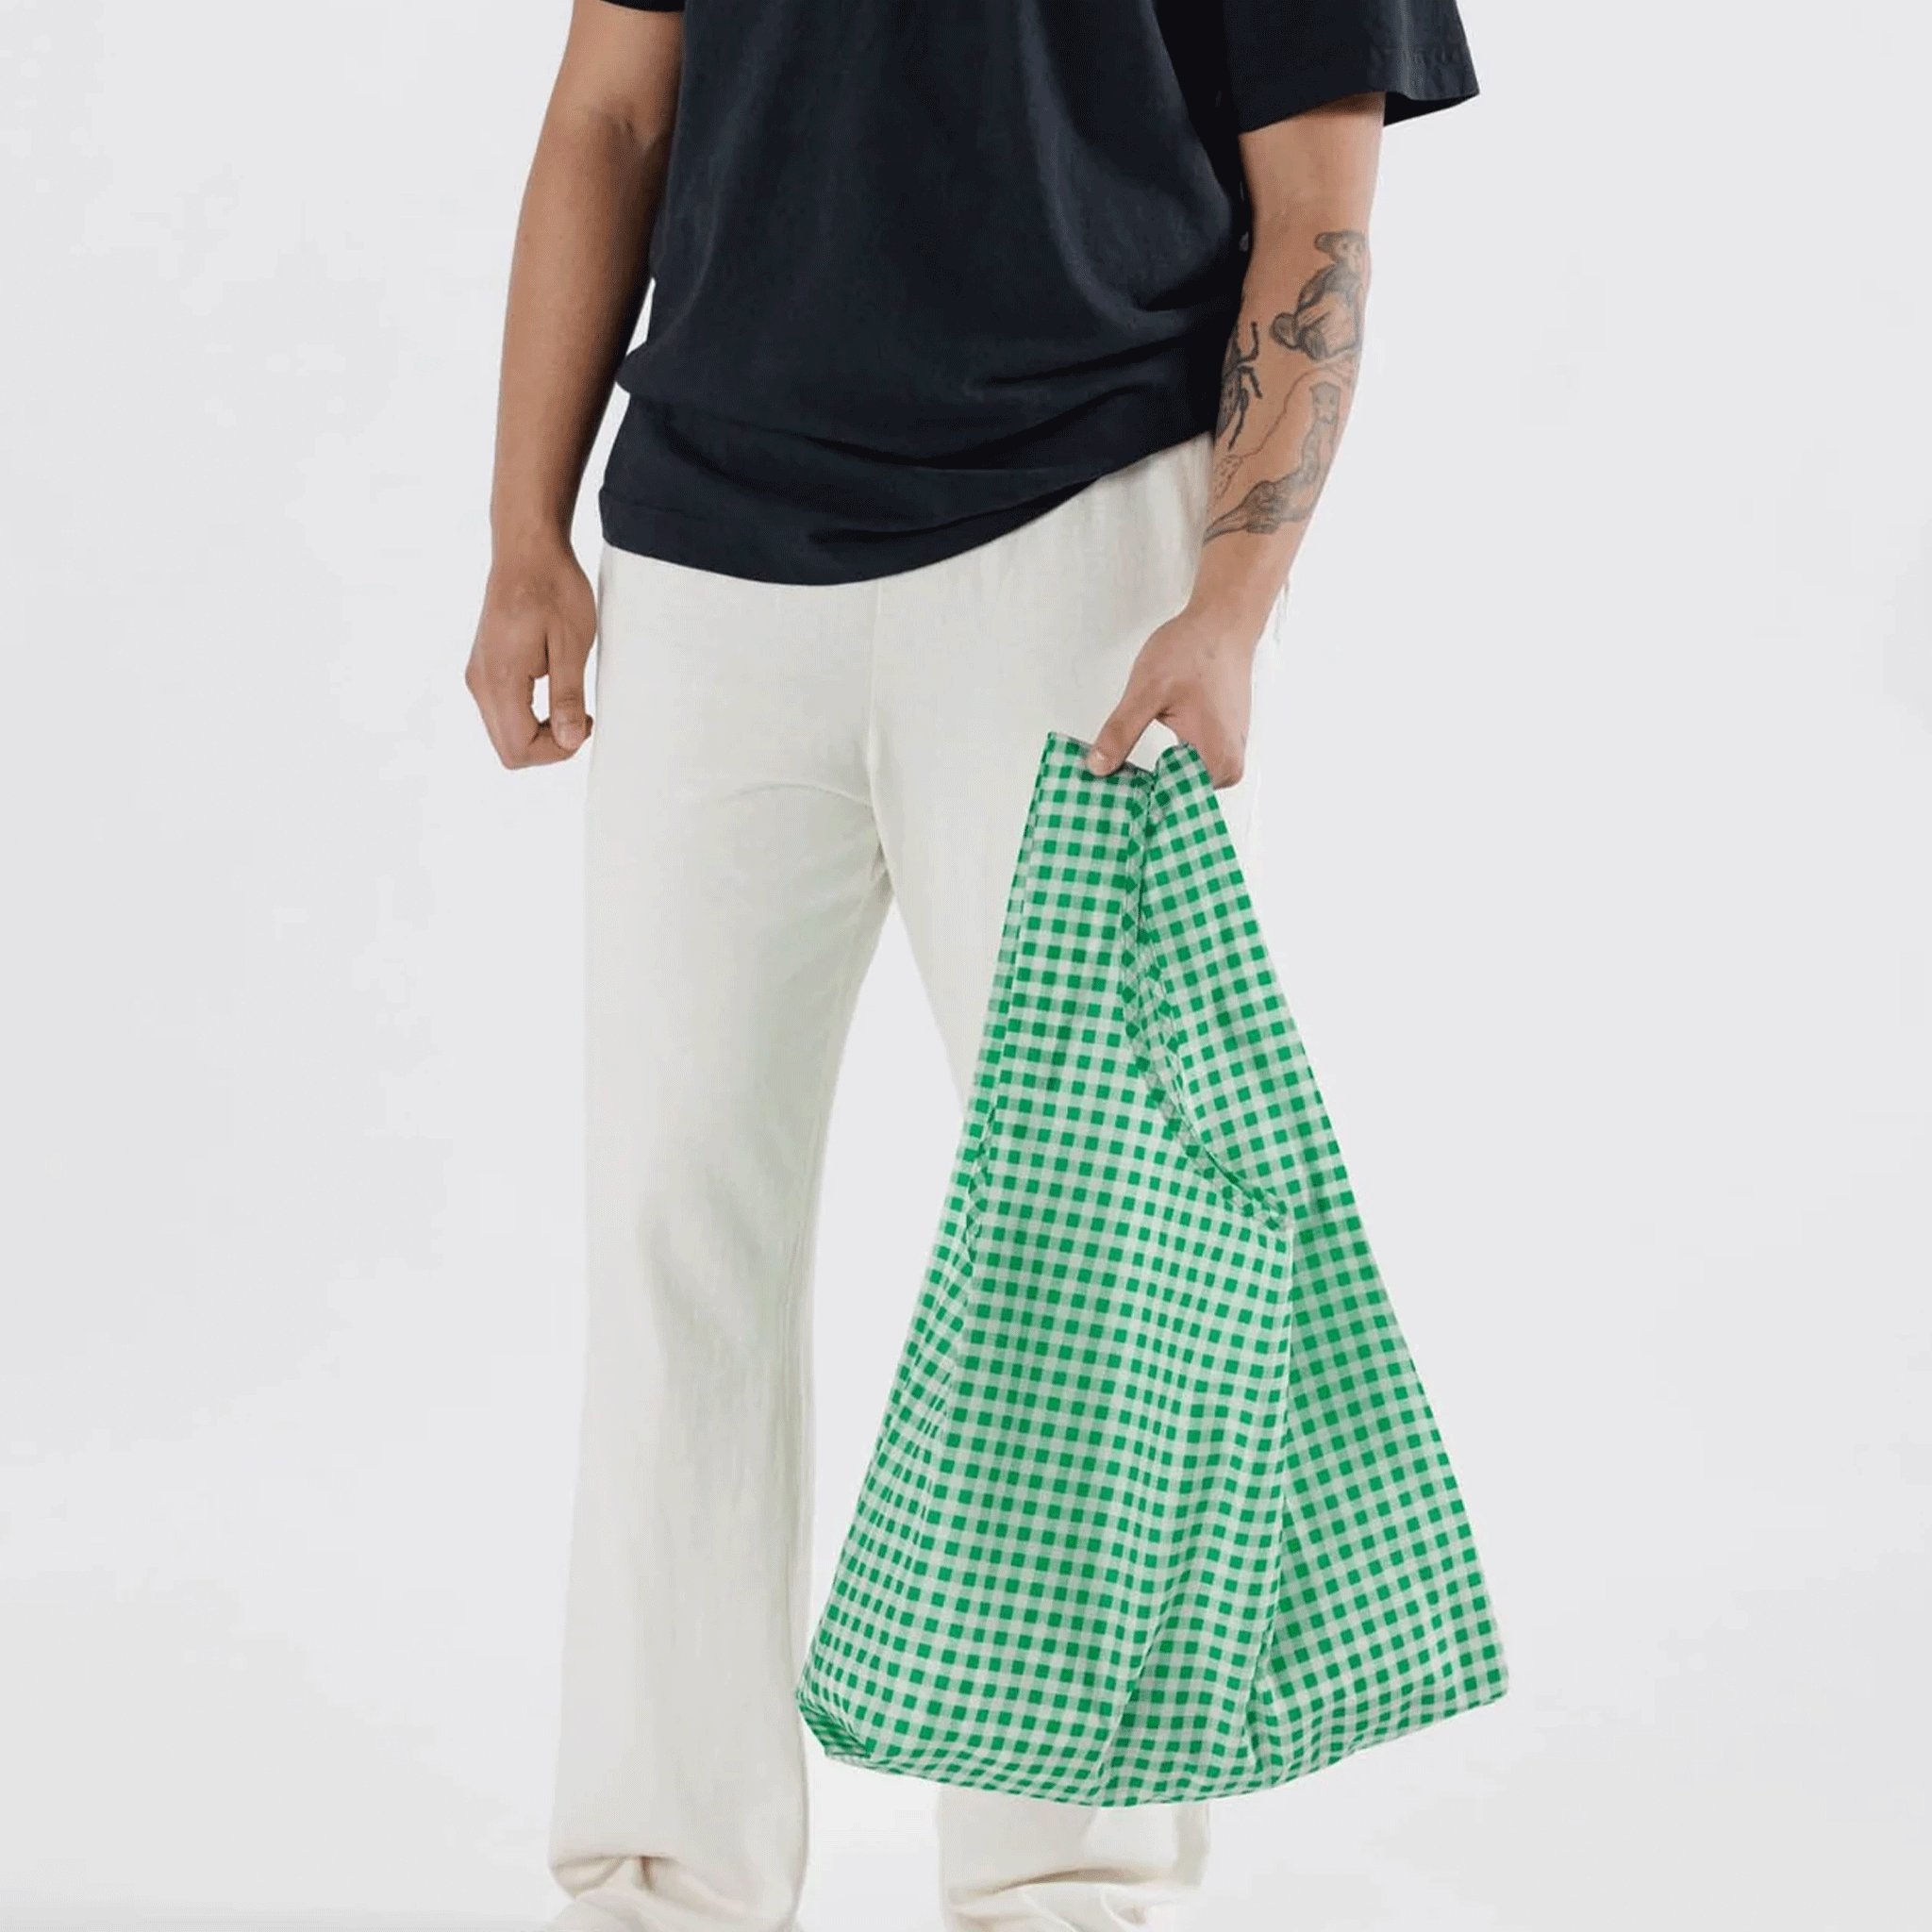 A model wearing a green and white gingham printed nylon tote bag.